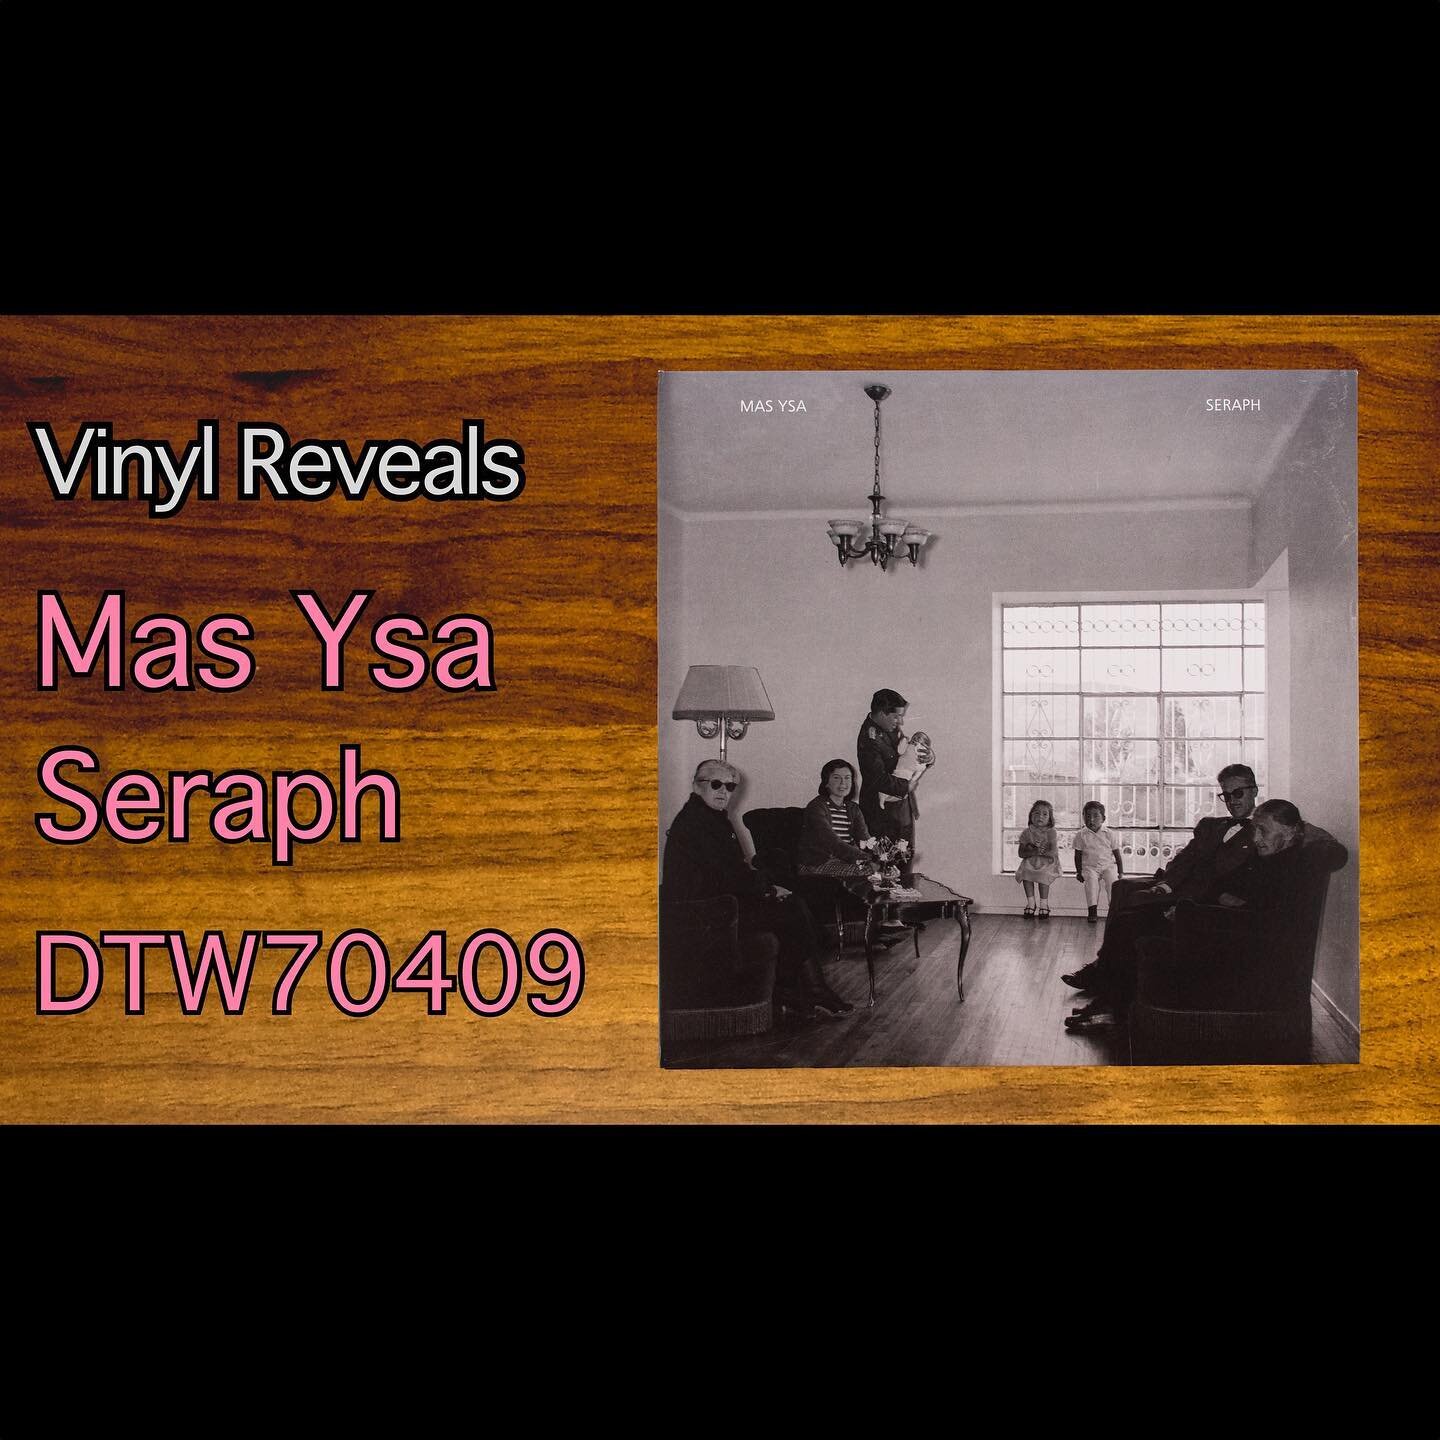 Today we are looking at Seraph by Mas Ysa. Video is now live on the Vinyl Reveals YouTube channel. Link in profile.

#vinylReveal #vinyl #vinylcollection #vinylrecords #records #vinylReveals #vinylcommunity #masysa @mas_ysa